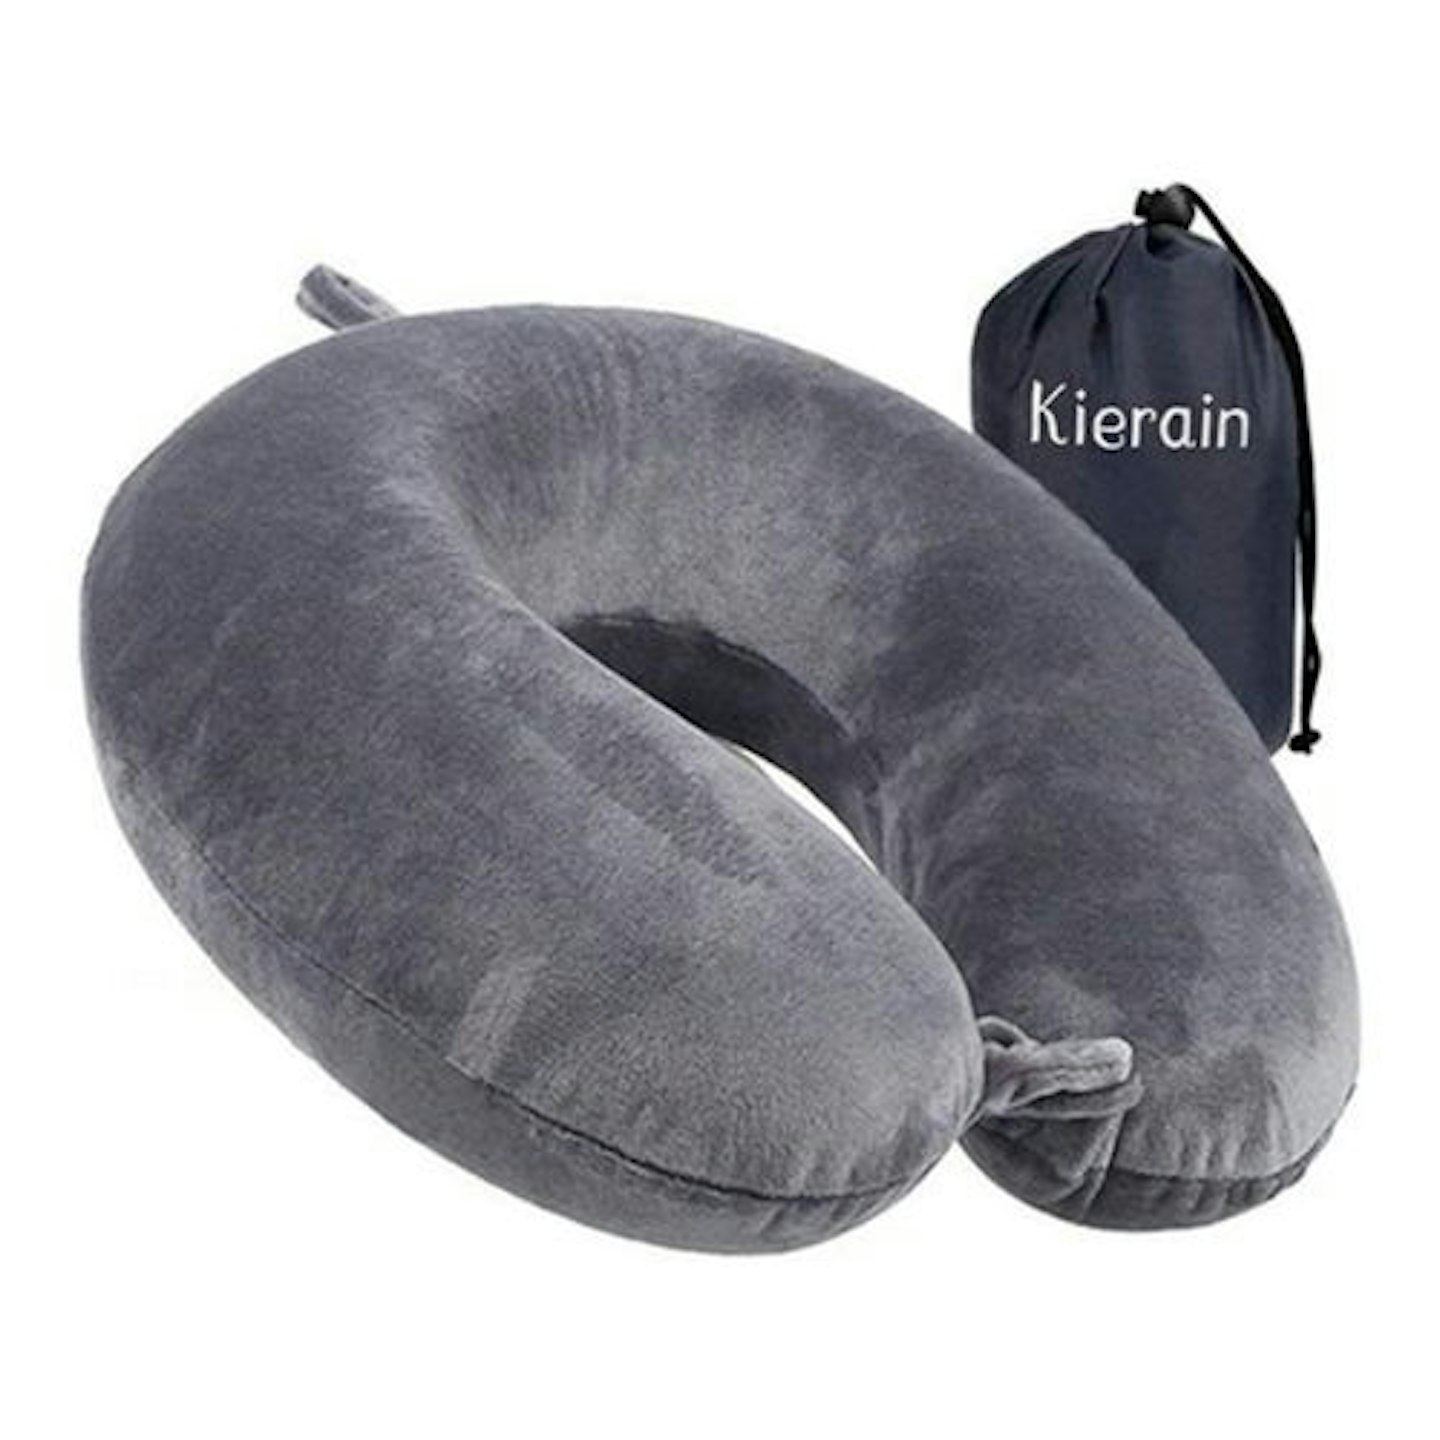 life hall Travel Pillow - Memory Foam Neck Pillow Support Pillow,Luxury Compact & Lightweight Quick Pack for Camping,Sleeping Rest Cushion (Gray)